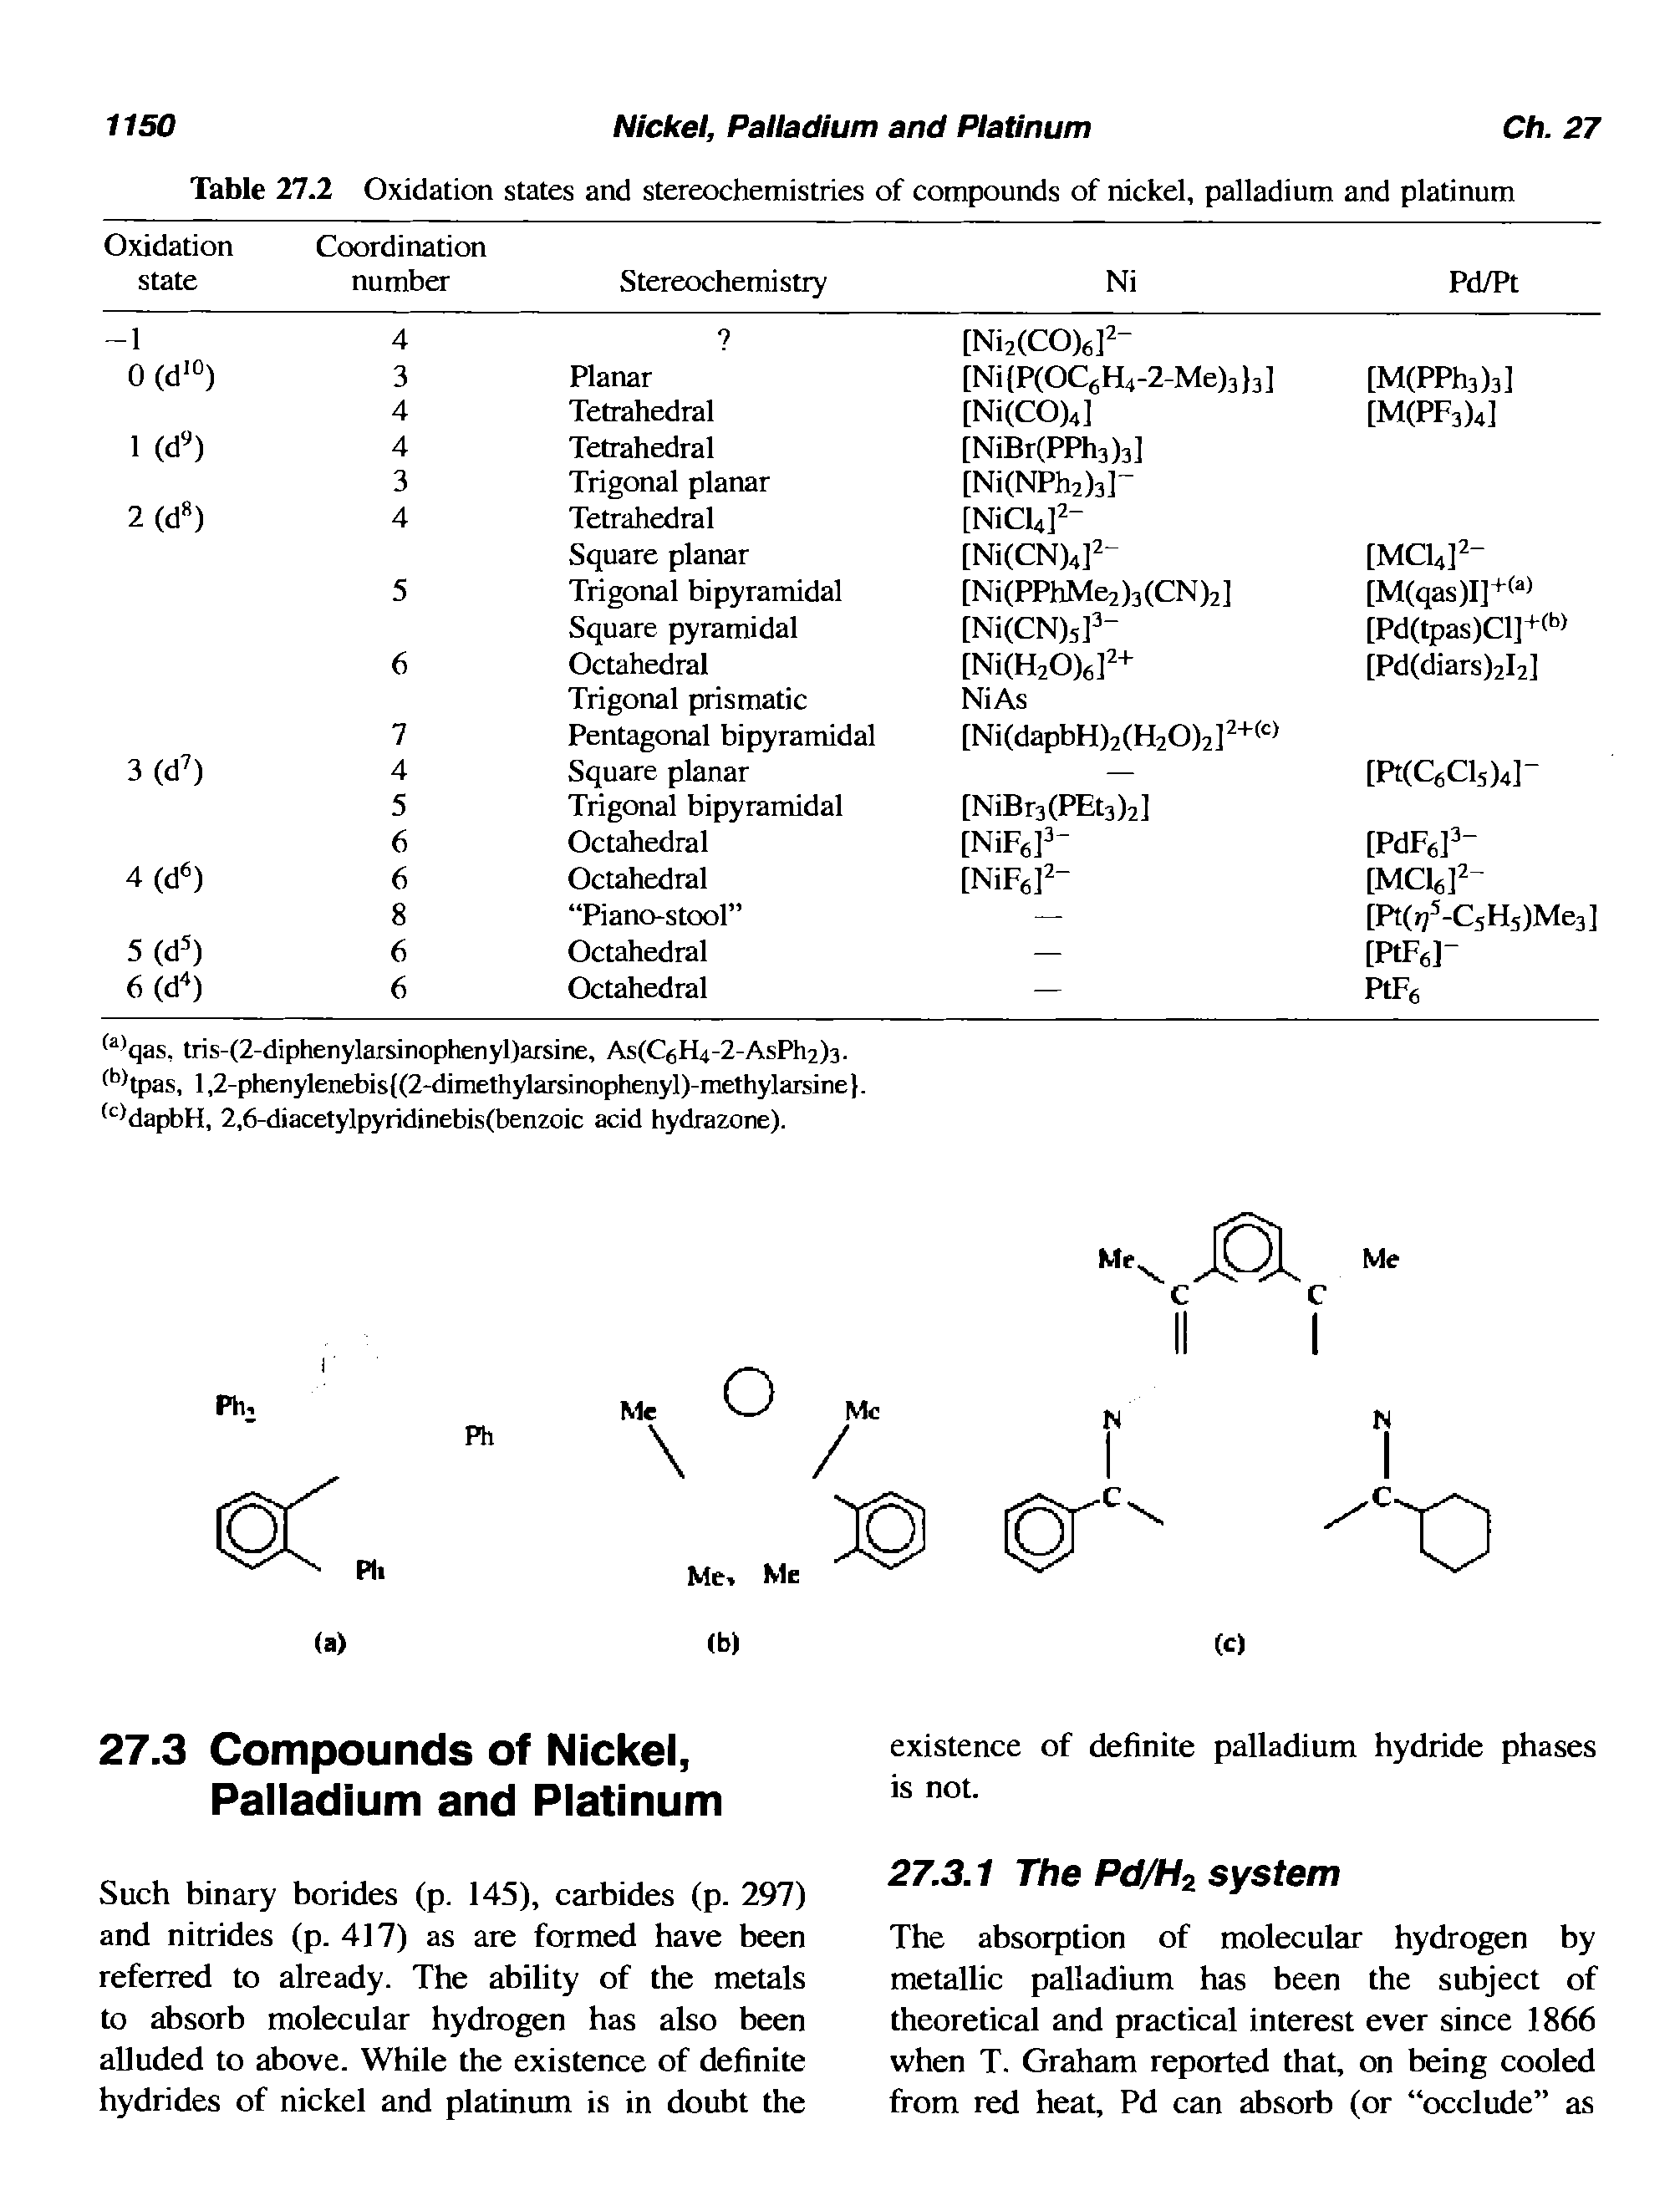 Table 27.2 Oxidation states and stereochemistries of compounds of nickel, palladium and platinum...